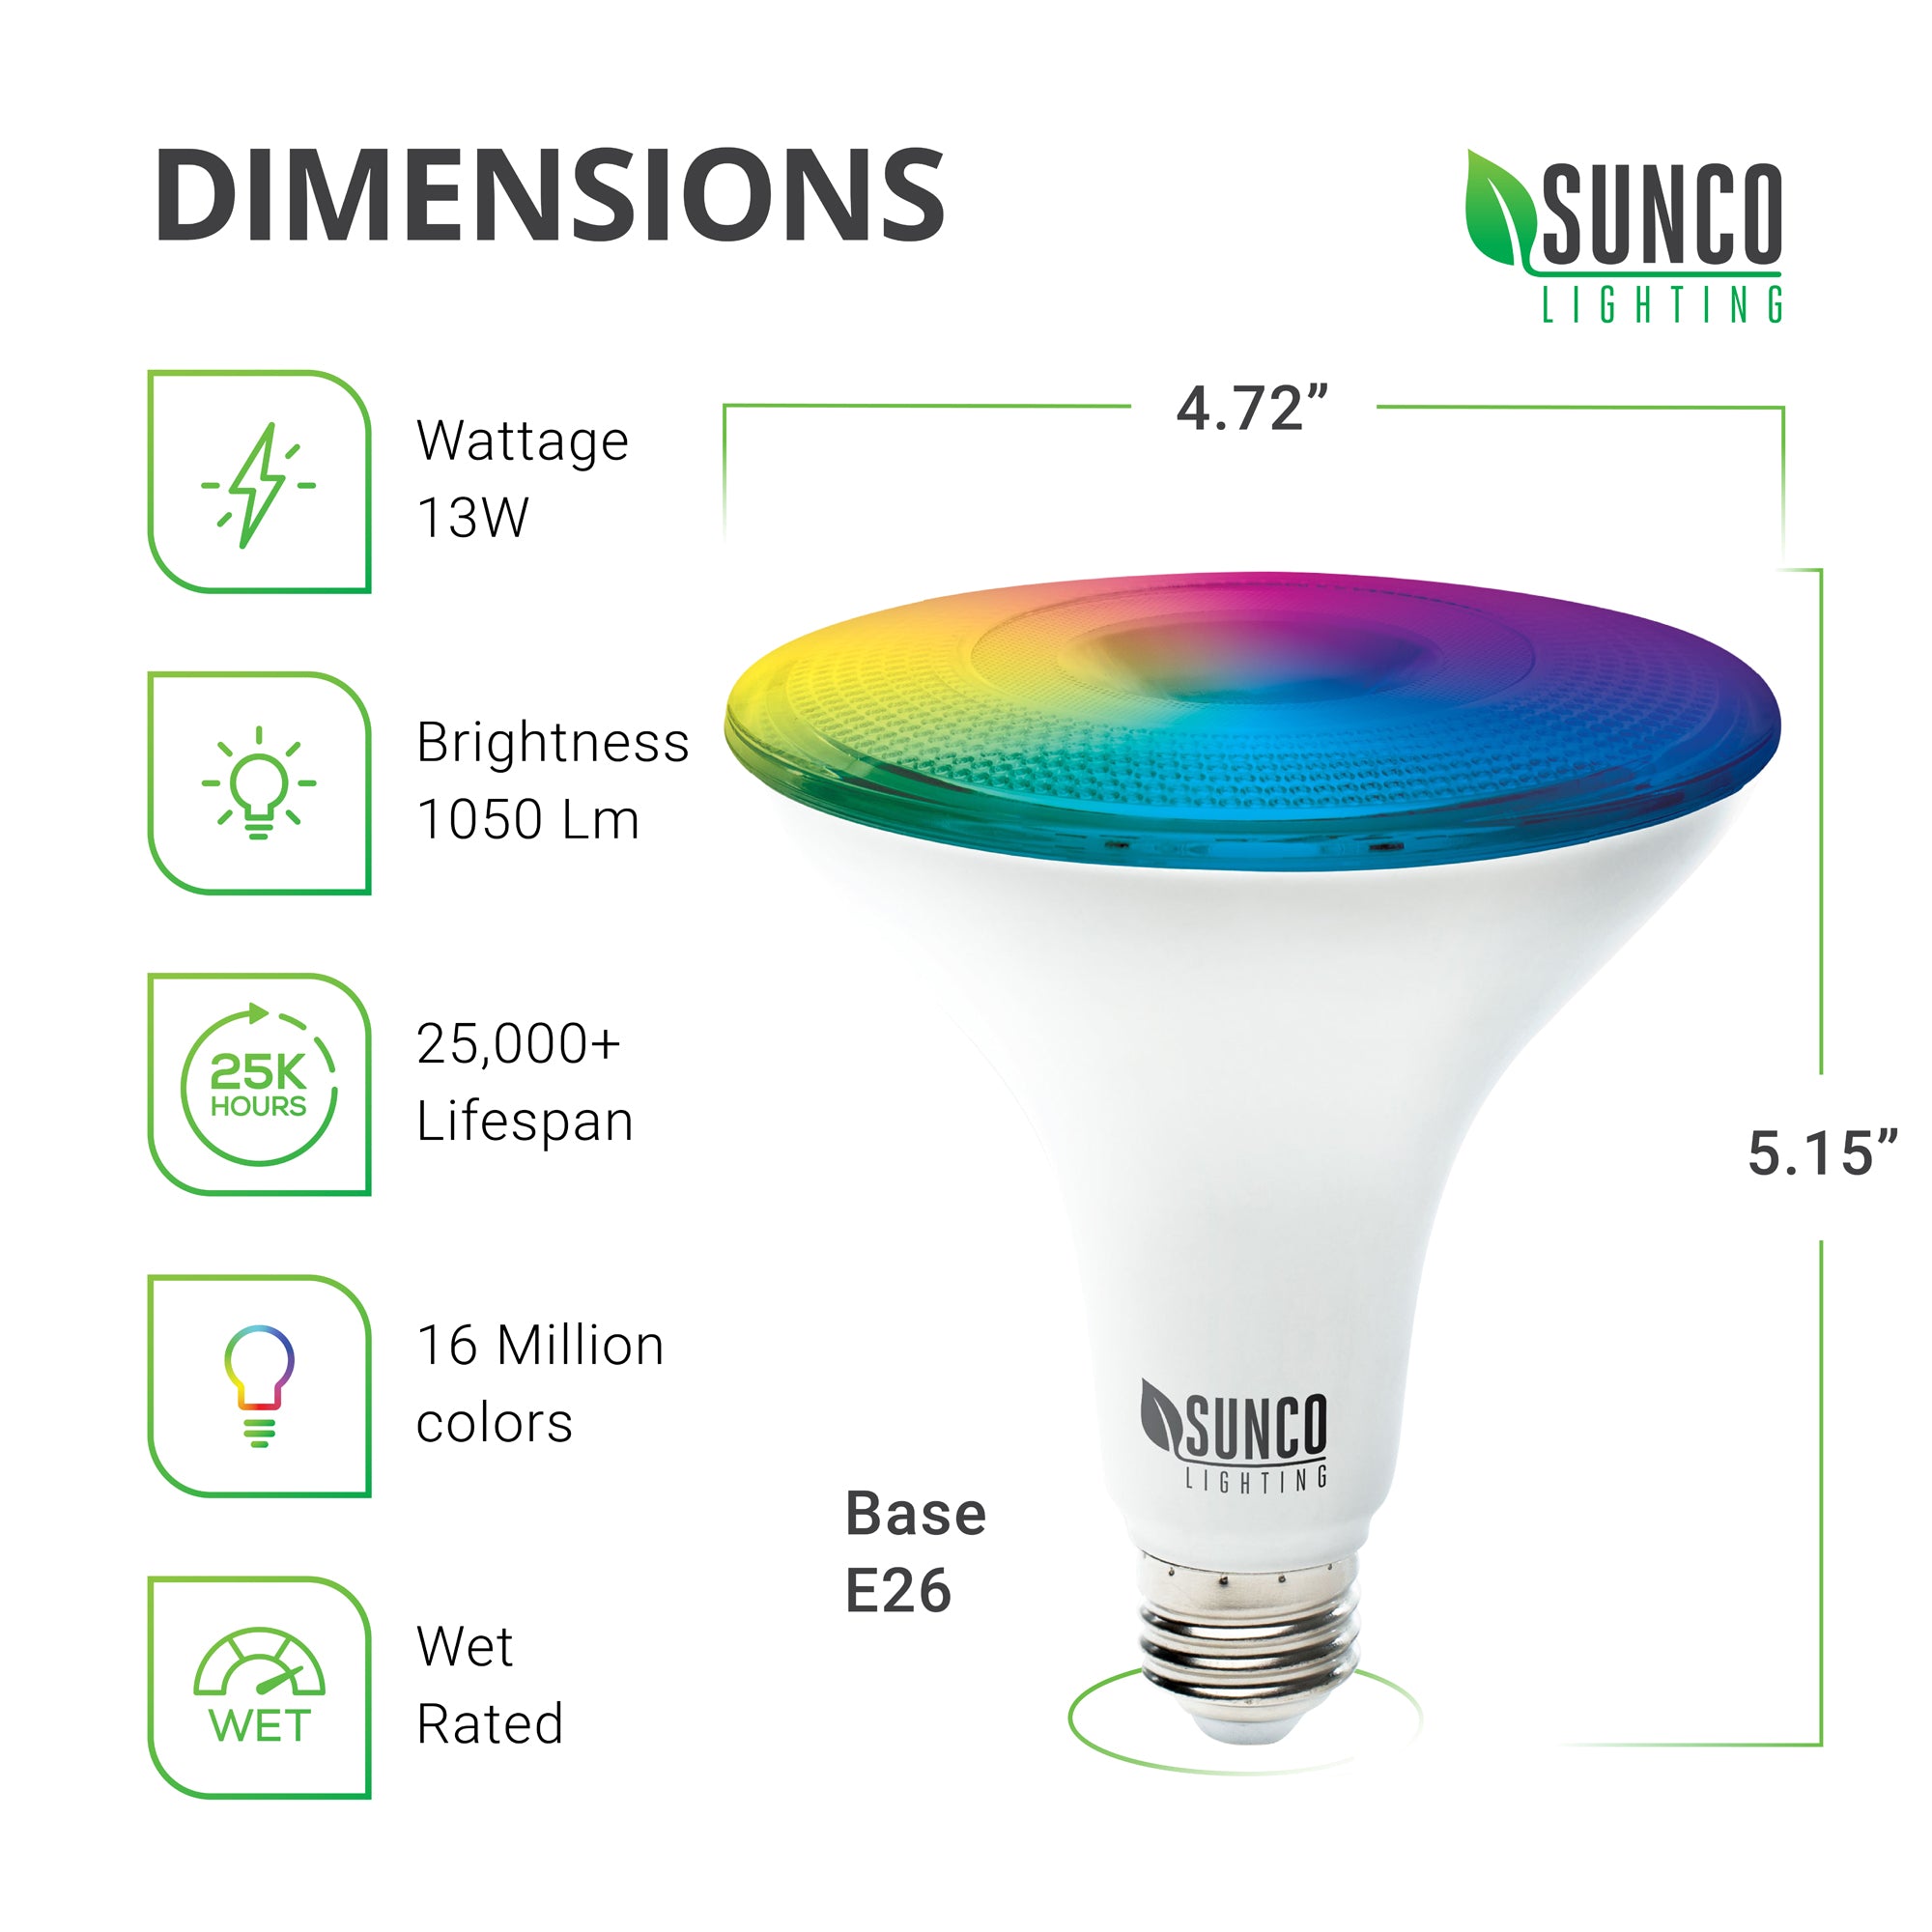 PAR38 LED Smart Bulb Dimensions: Diameter: 4.72 inches, Height: 5.15 inches, Base: E26. Other specs: Brightness: 1050 Lumens, Wattage: 13W, Voltage 120V. This bulb is dimmable, includes tunable white, and a choice of 16 million colors and offers a 25,000 hour lifespan. This wet rated bulb can be used outside or in wet areas like kitchens and bathrooms. Fits in 6-inch recessed cans for adjustable downlighting.